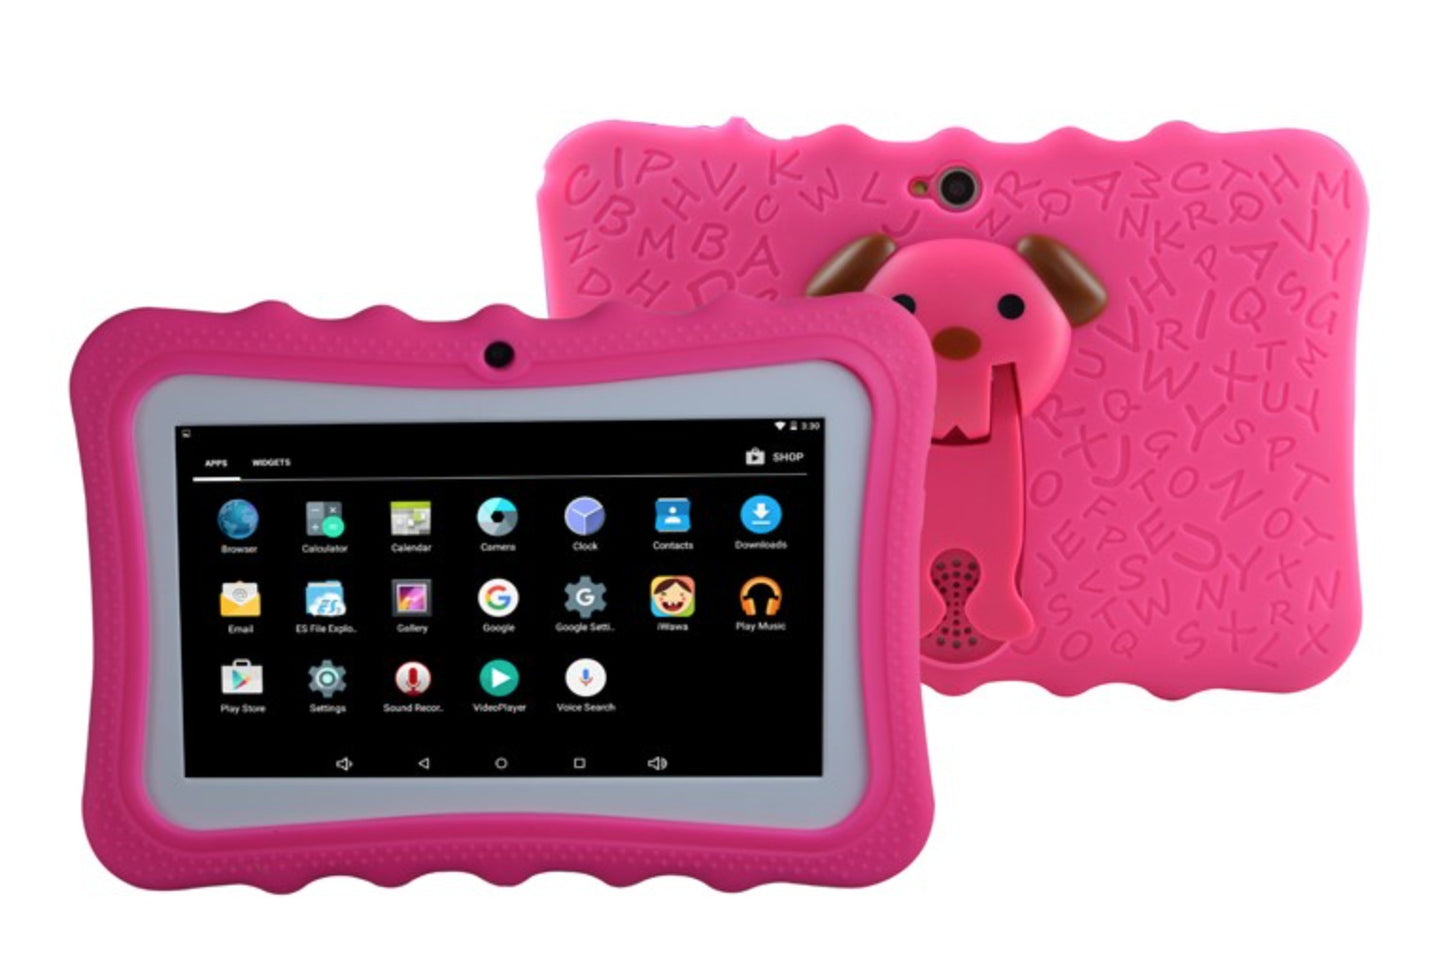 7 Inch Android Kids Tablet WIFI tablet With Leather Case Tablet Android Gift Kids Tablet